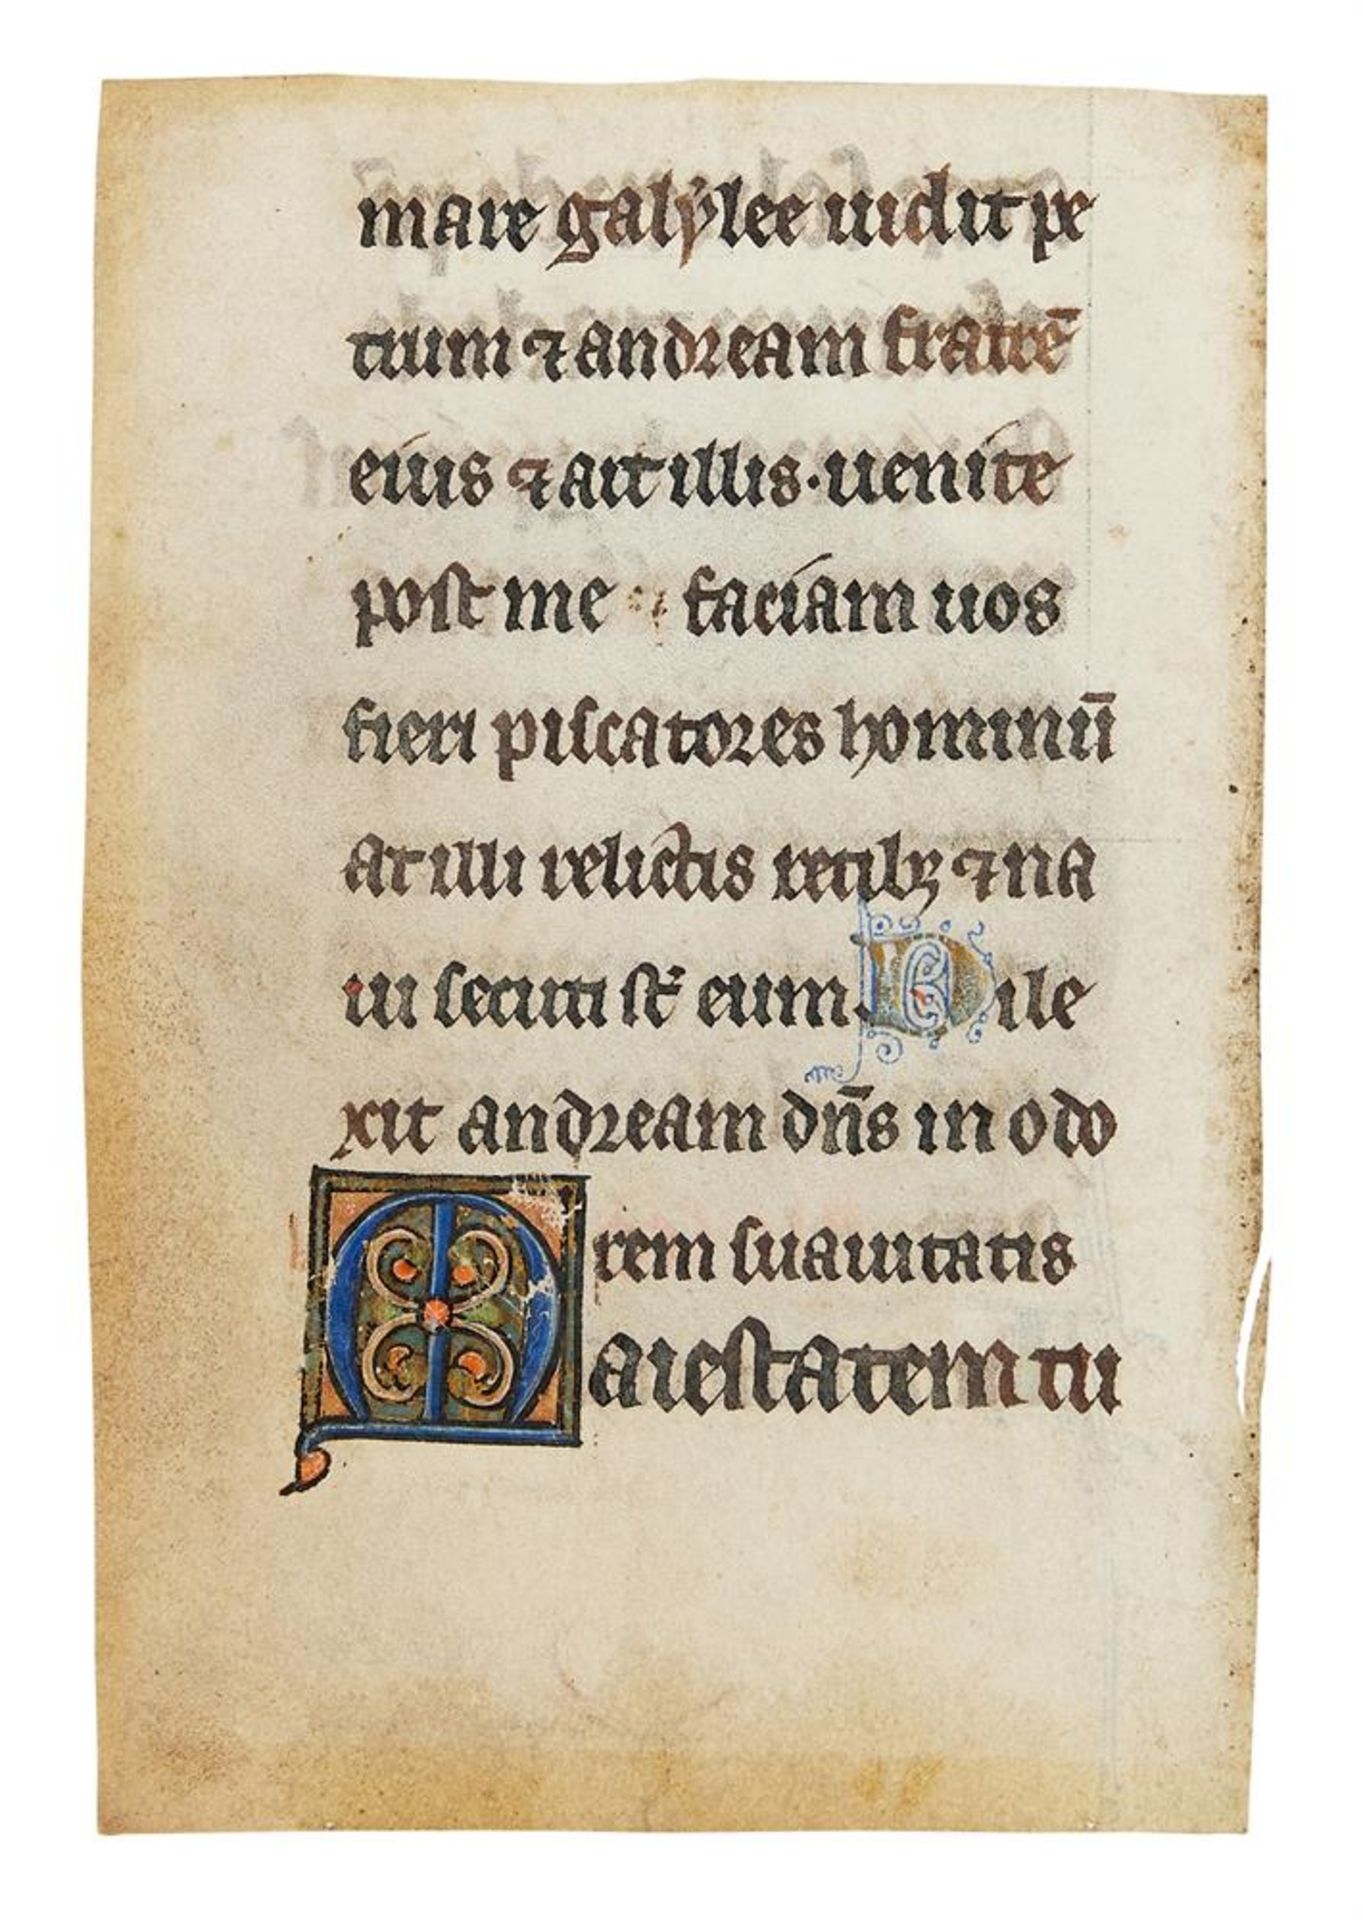 Leaf from a Psalter or Psalter-Hours, with large illuminated initial, in Latin, - Image 2 of 2